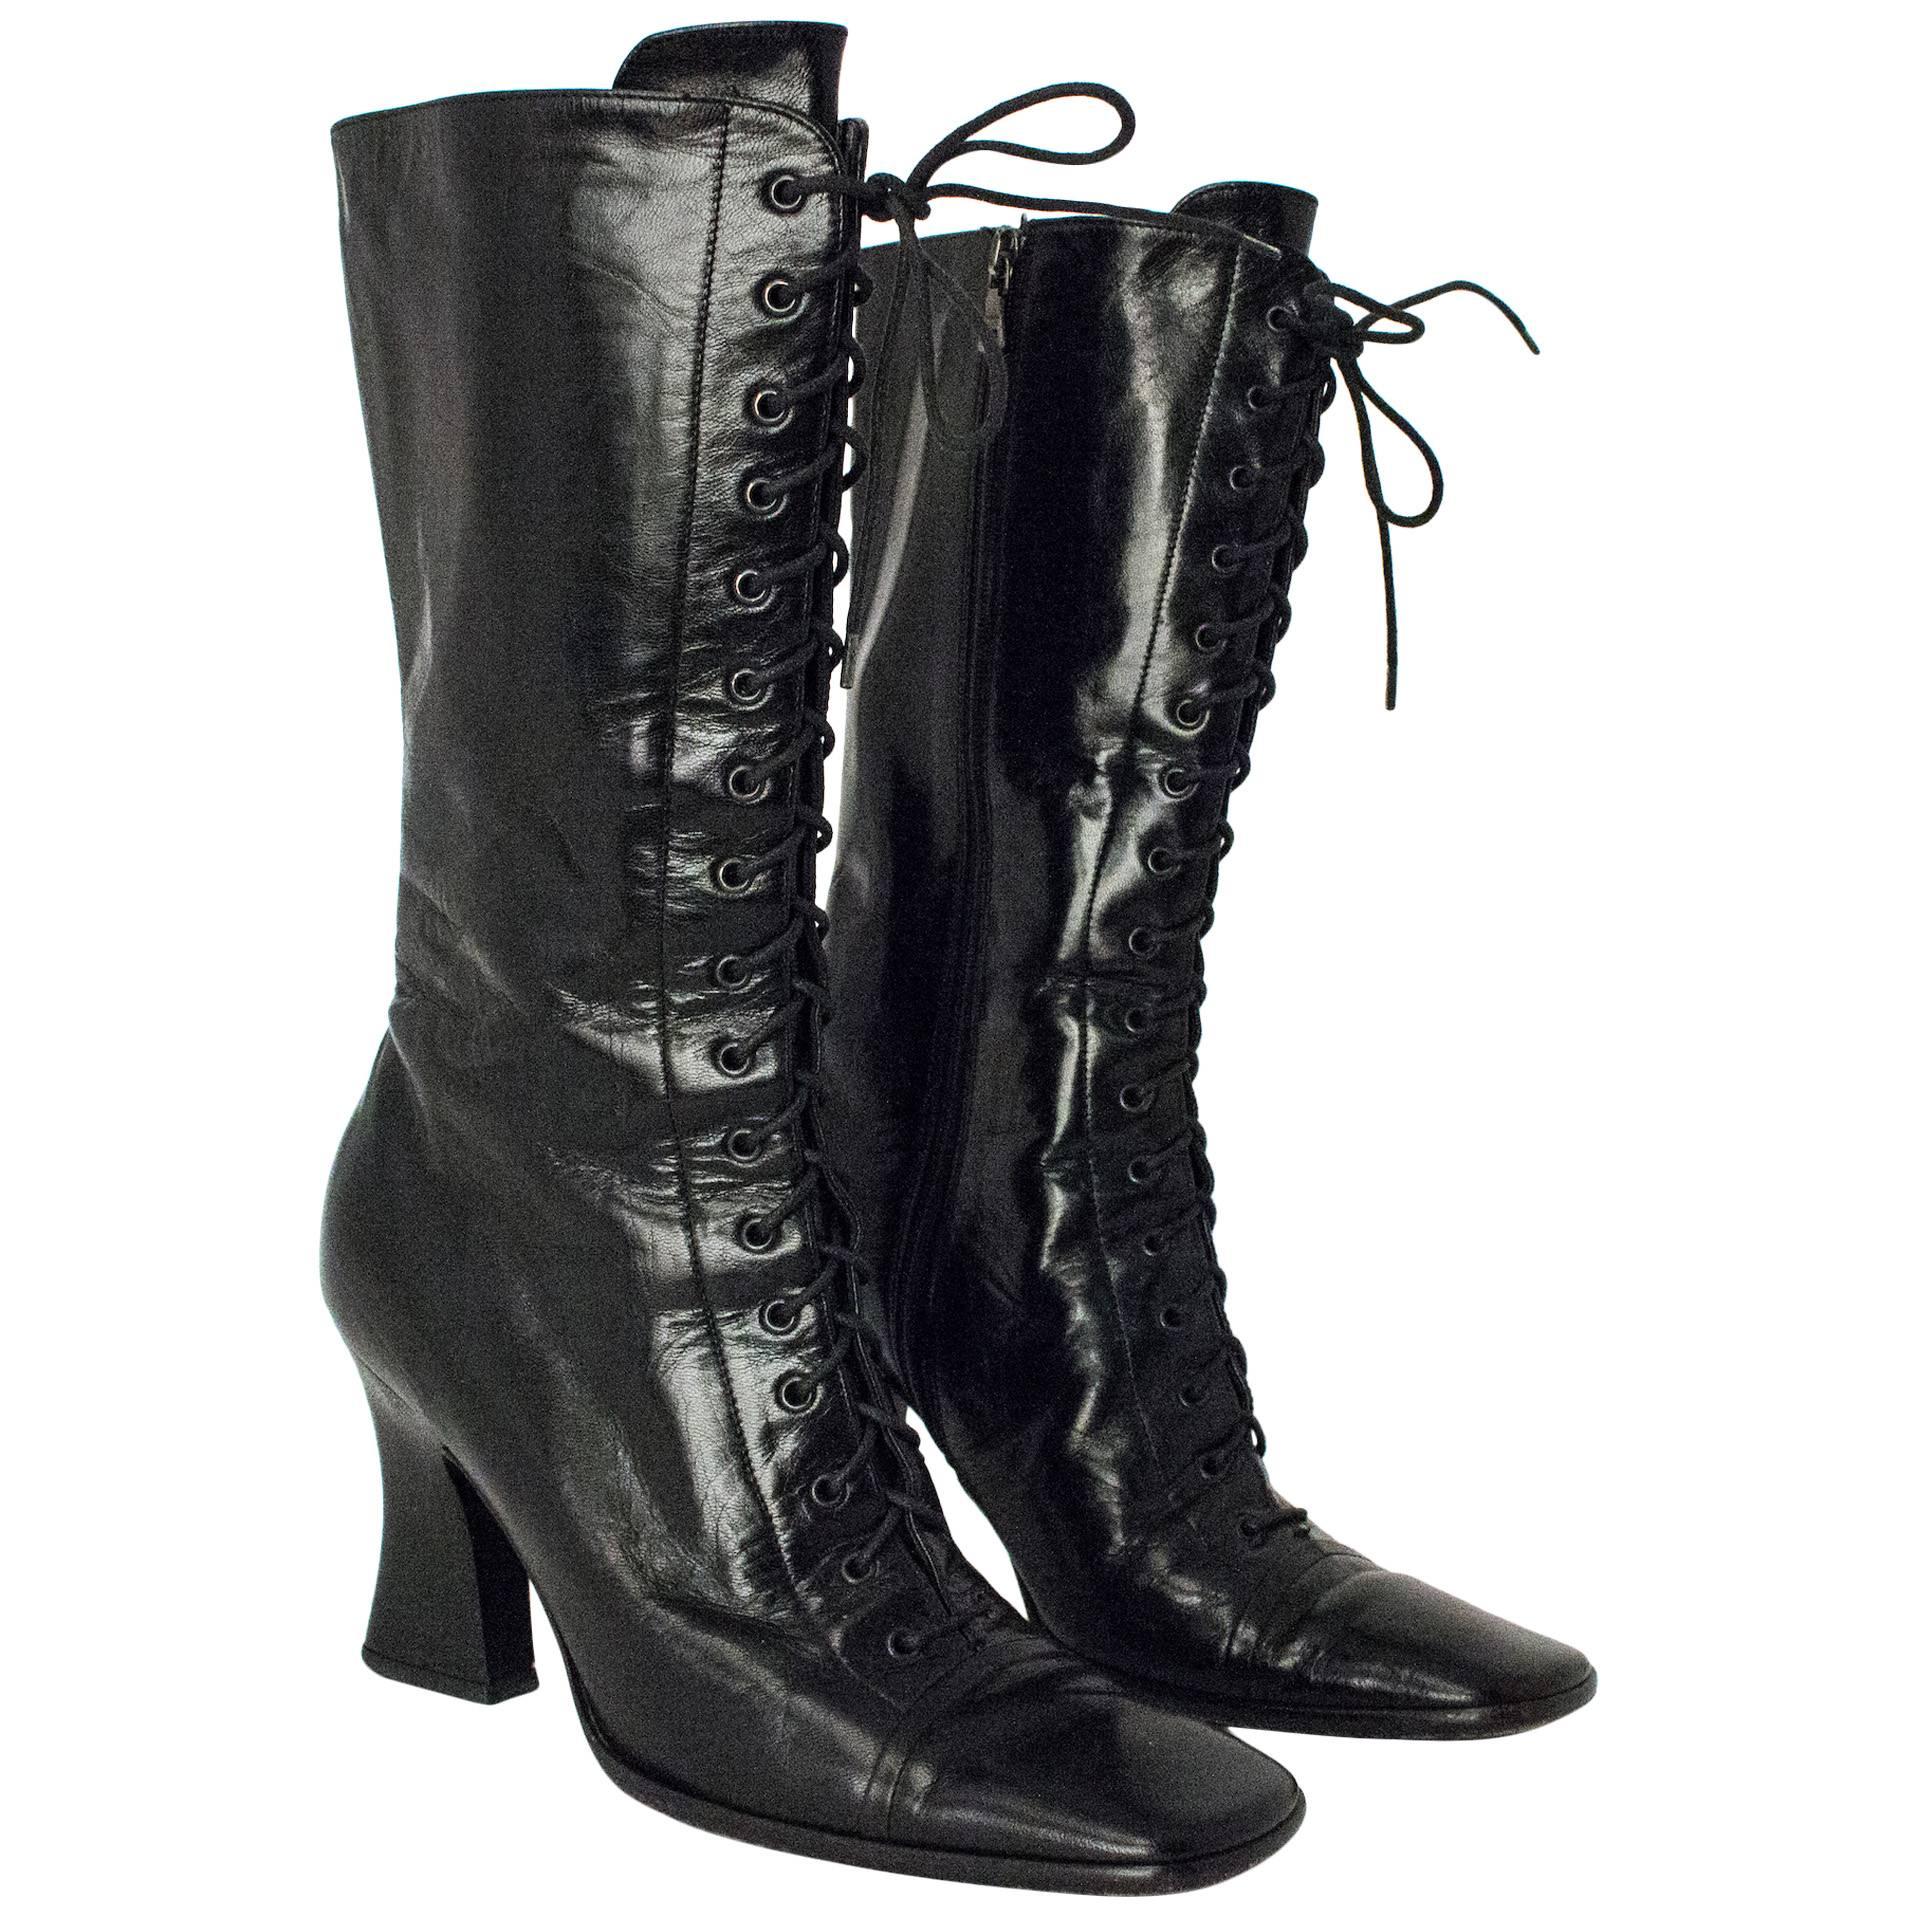 90s Black Leather Laceup Square Toe Boots